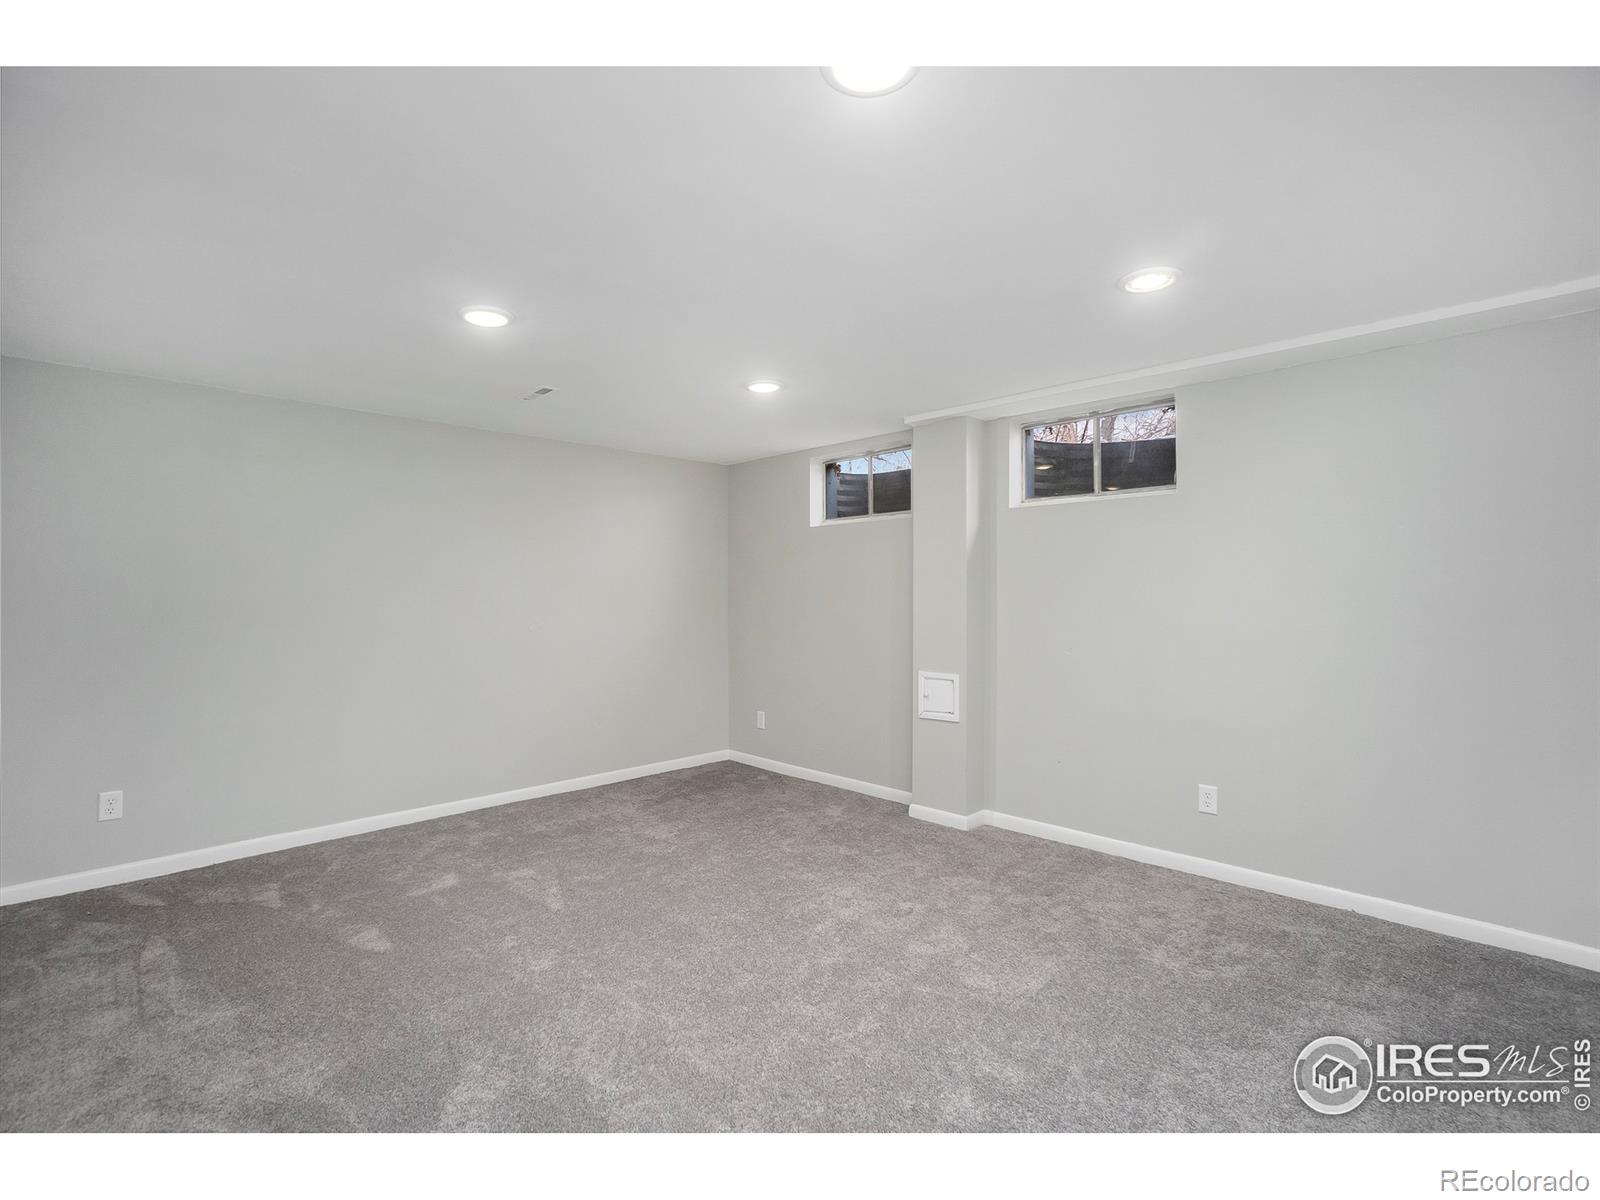 503 27th, Greeley, CO